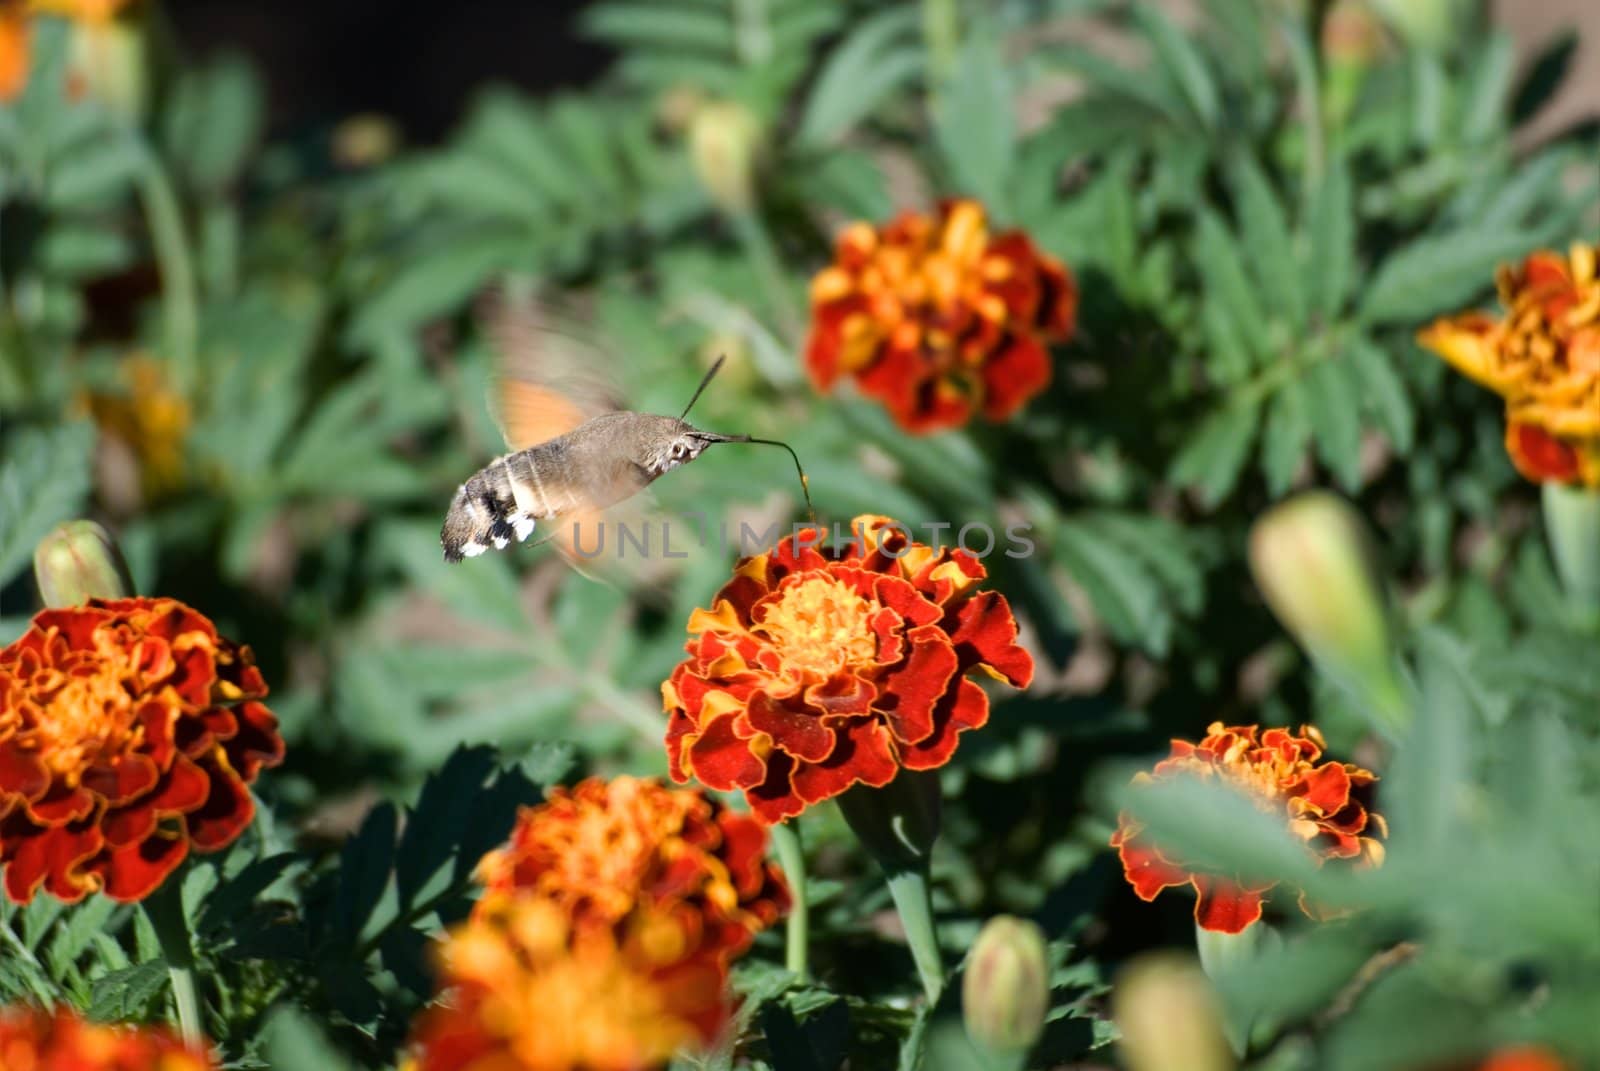 The butterfly drinks nectar from a flower of a calendula